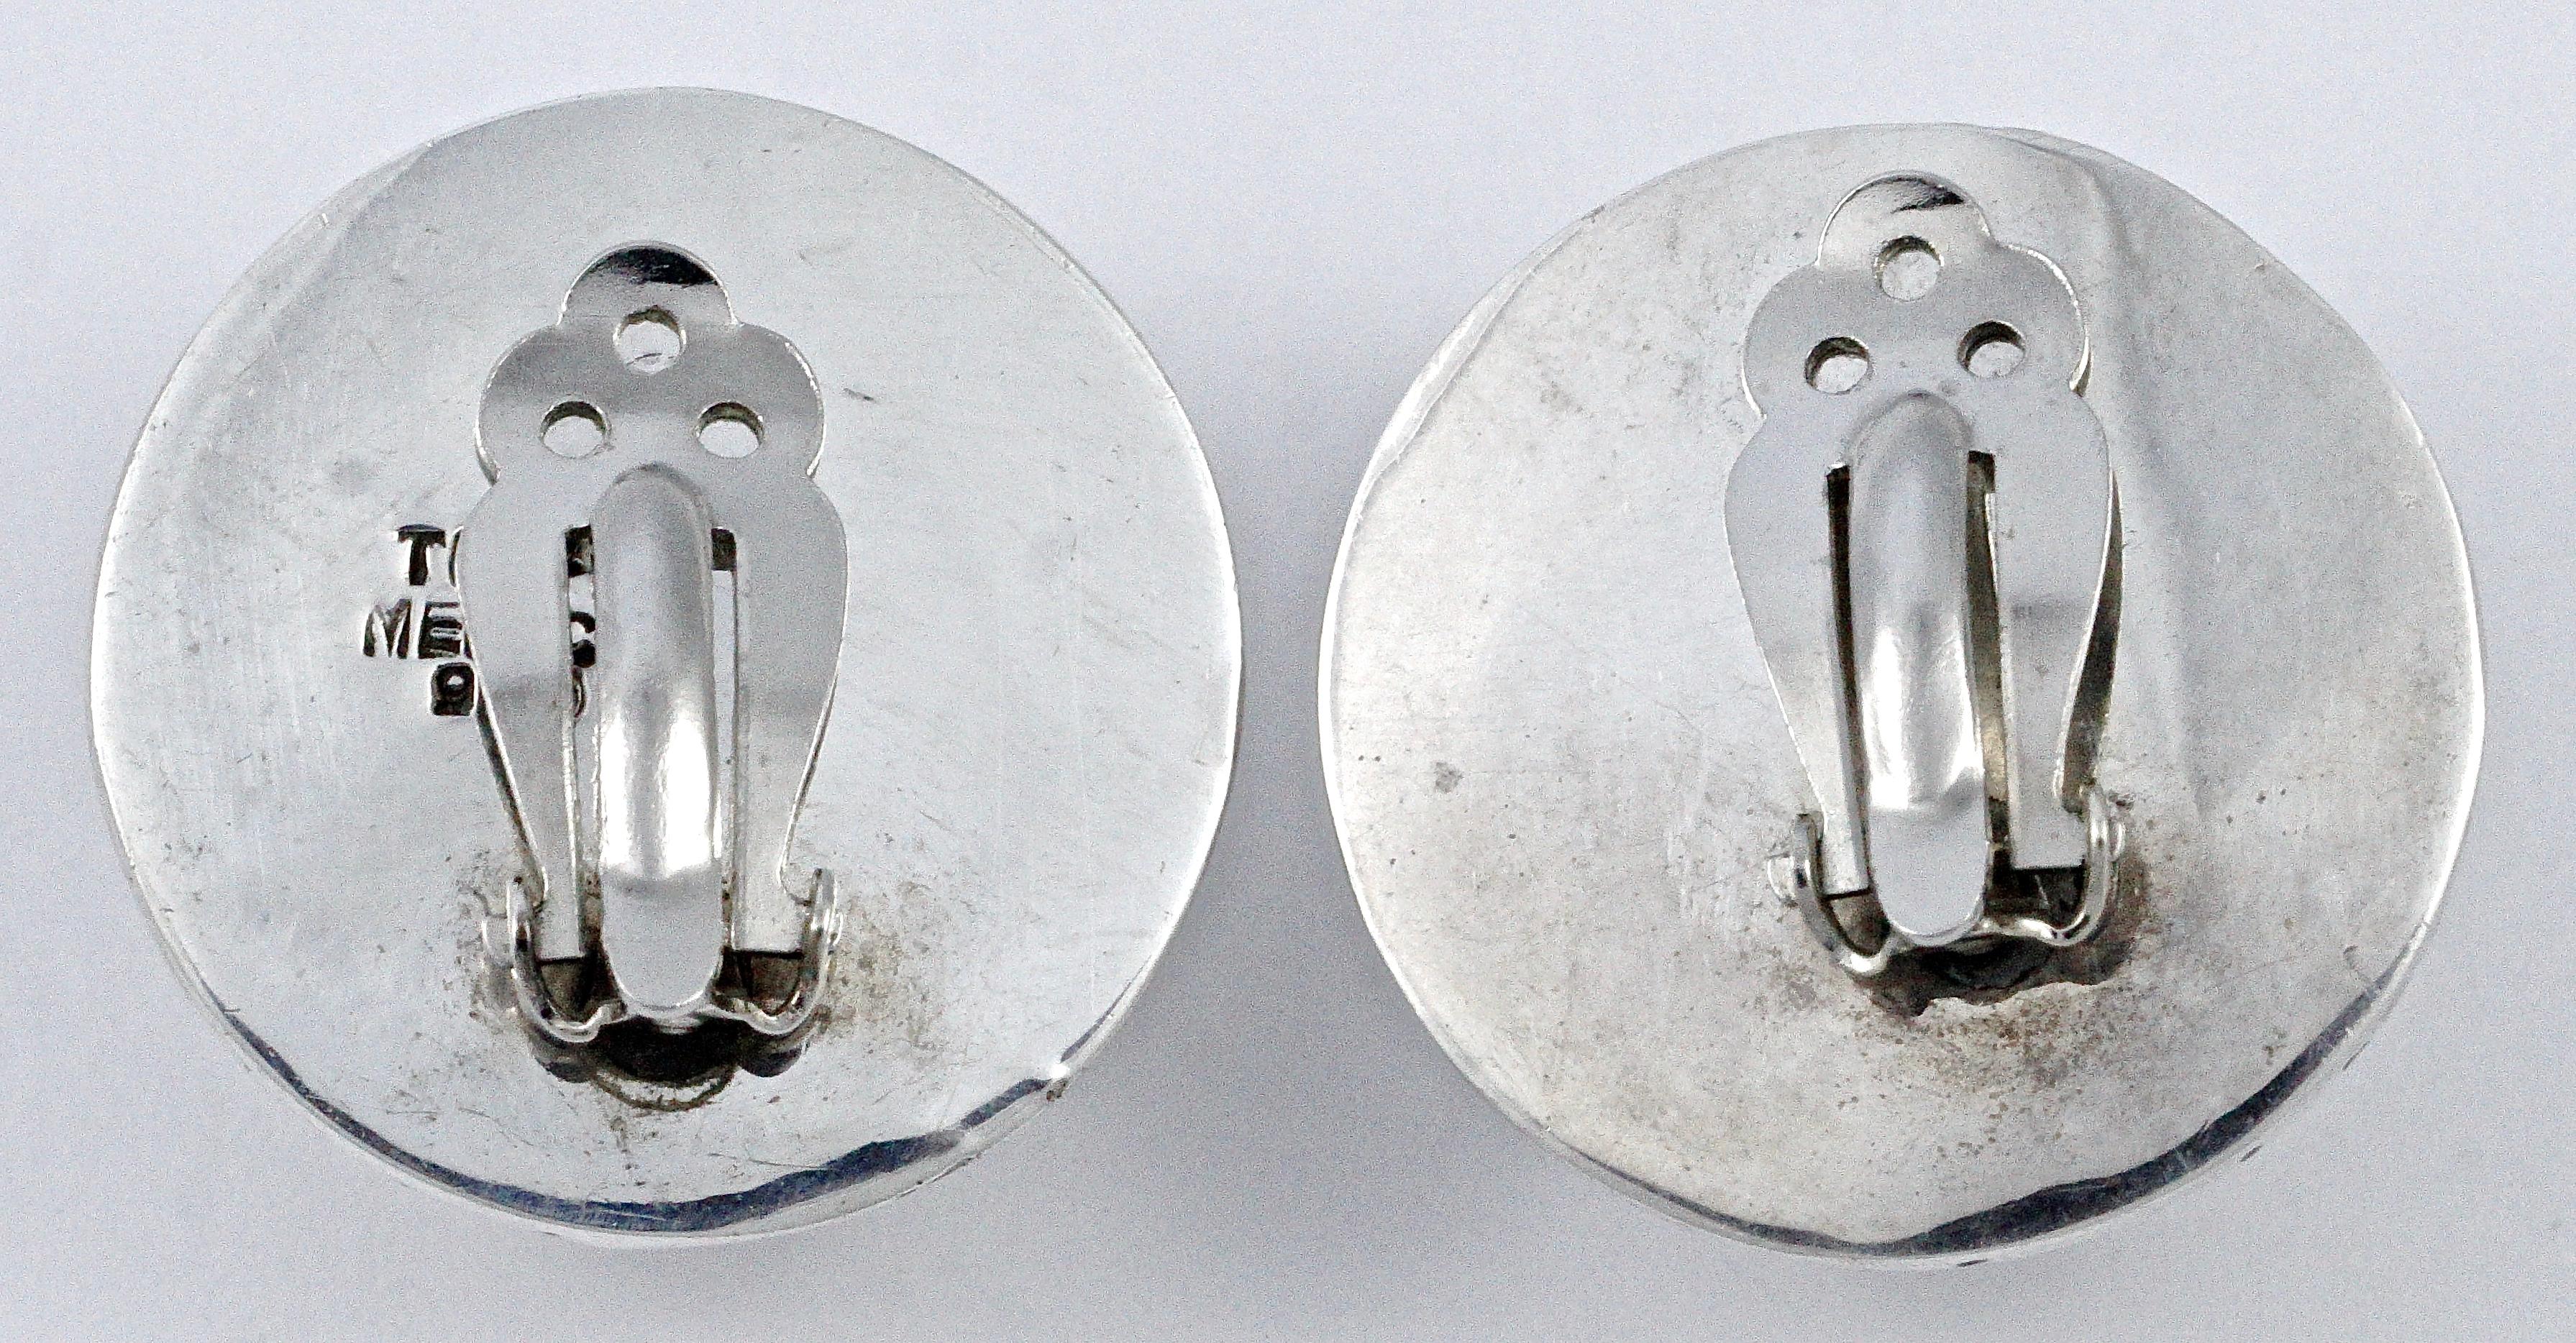 Beautiful Mexico Taxco TD 25 silver 925 round dome shape clip on earrings, featuring an embossed irregular circle design. Measuring diameter 2.9cm / 1.14 inches. The earrings are in very good condition.

This is a stylish and substantial pair of